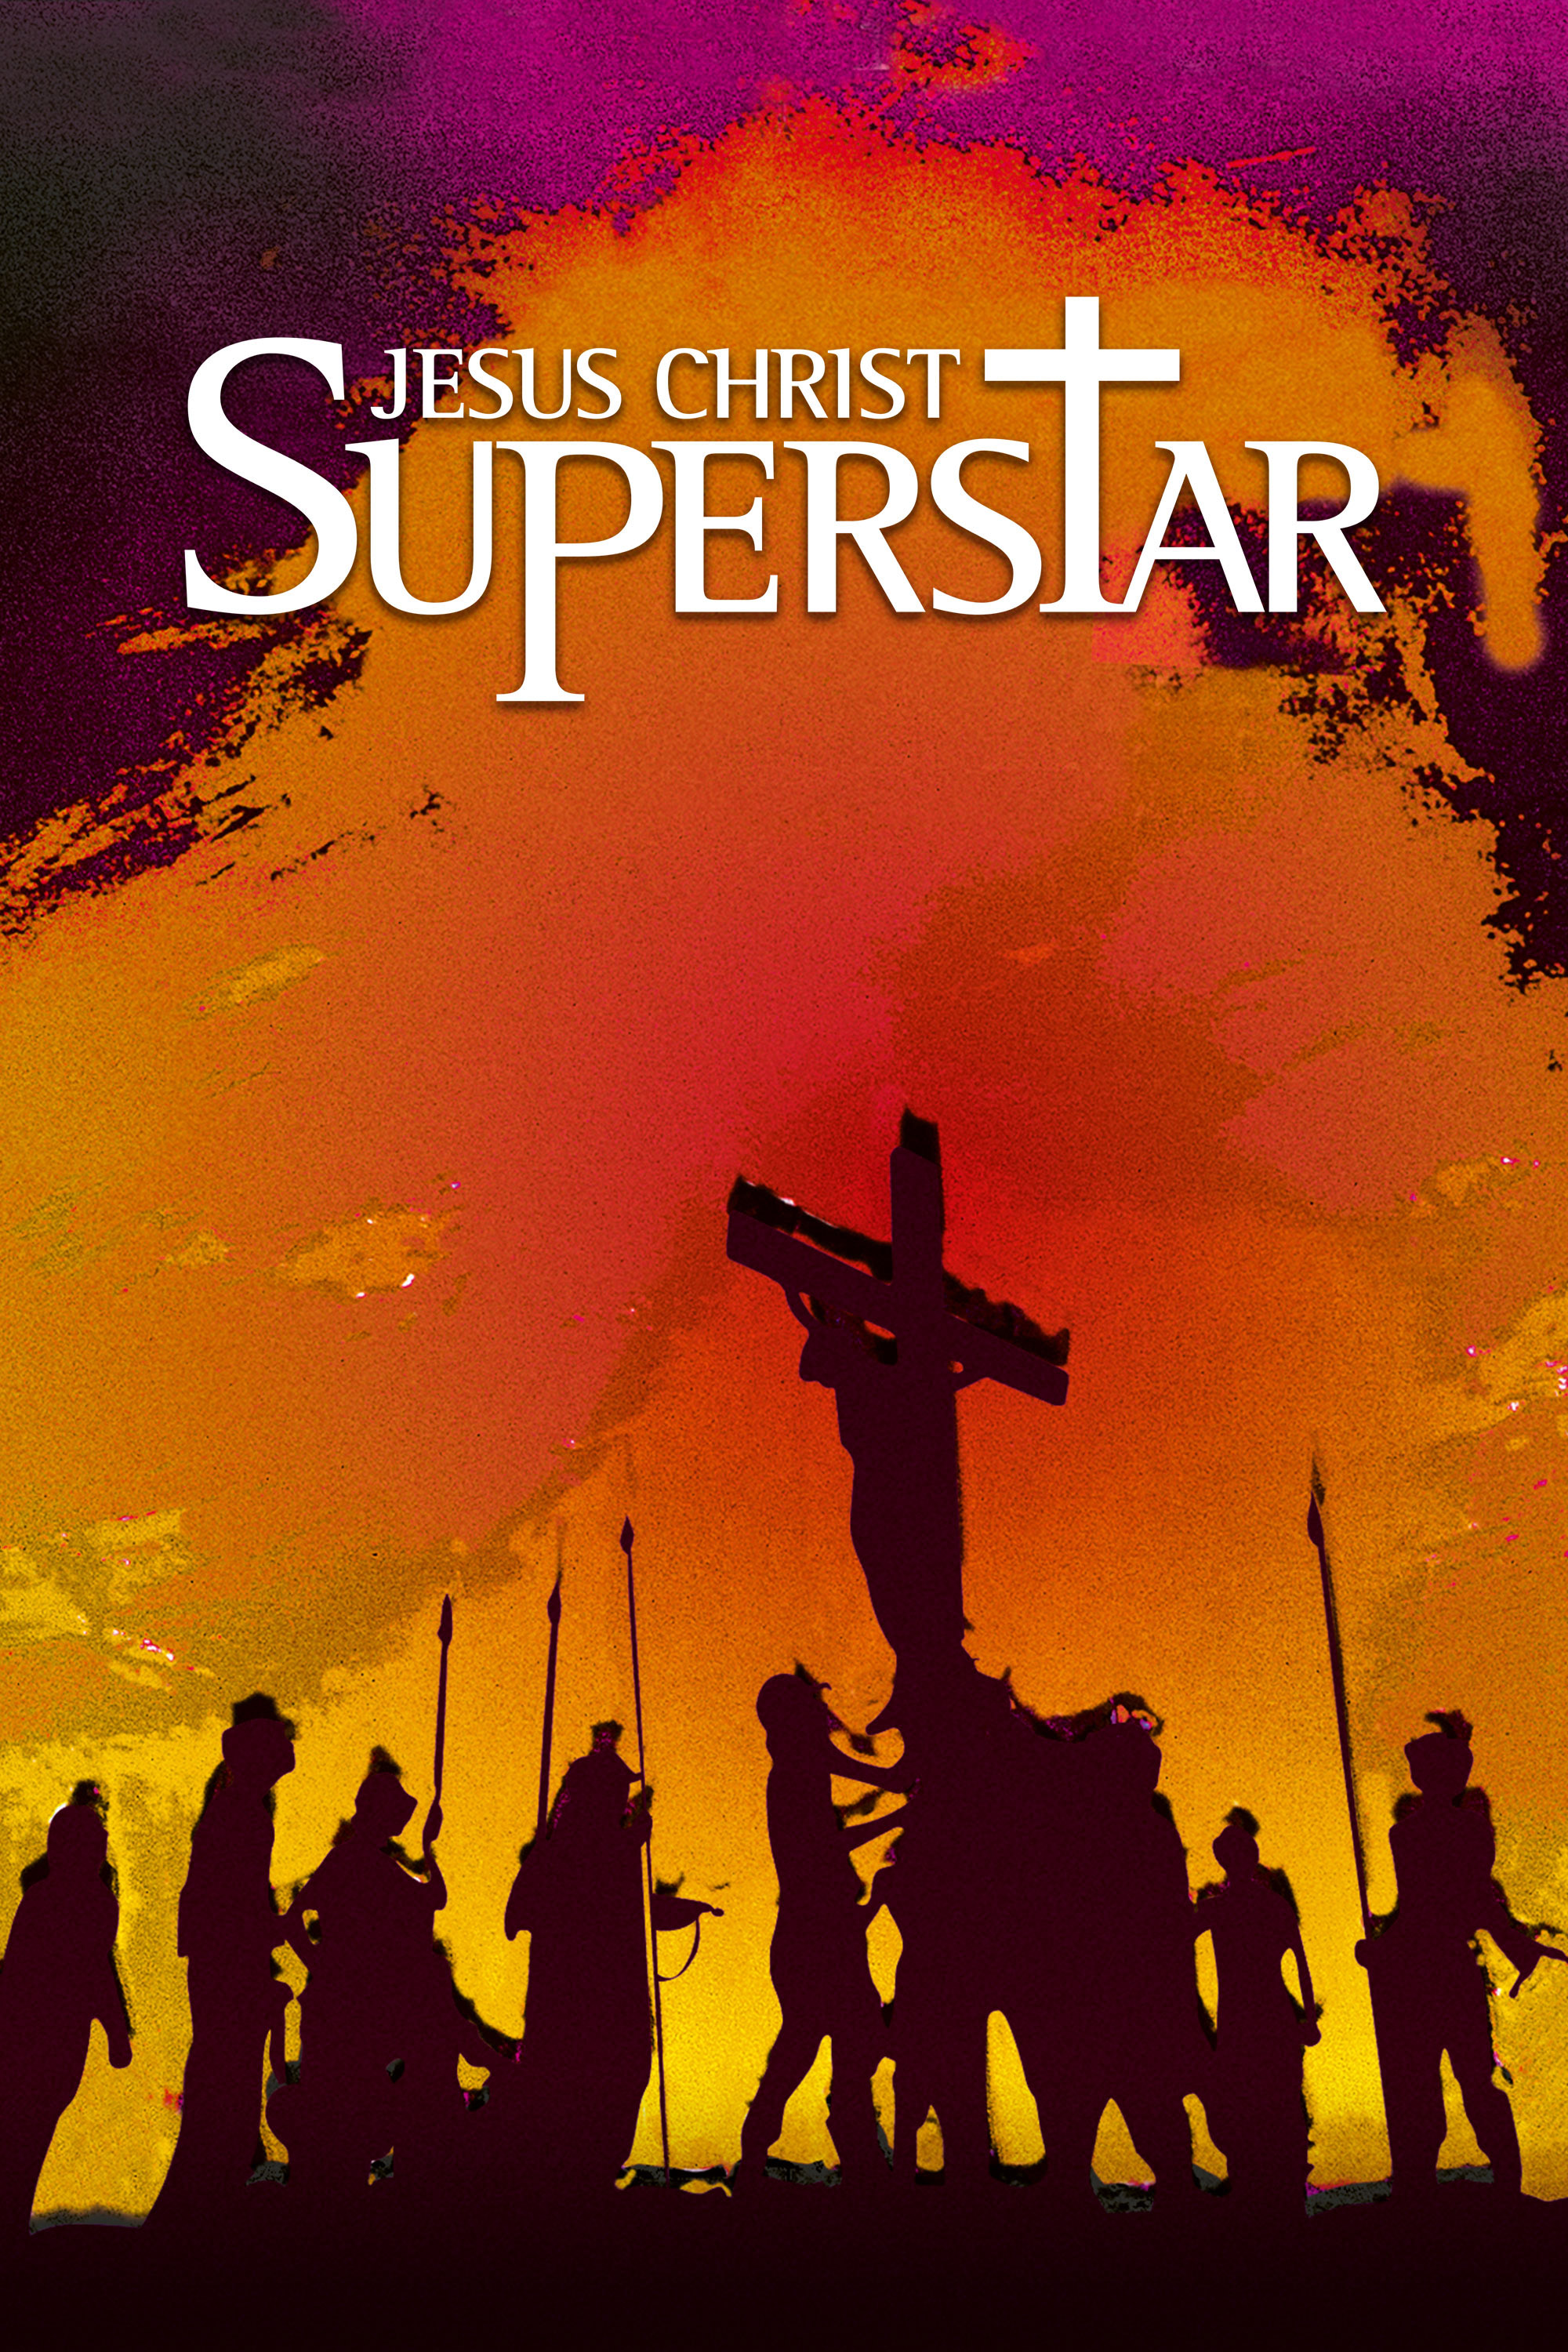 Jesus Christ Superstar - Where to Watch and Stream - TV Guide